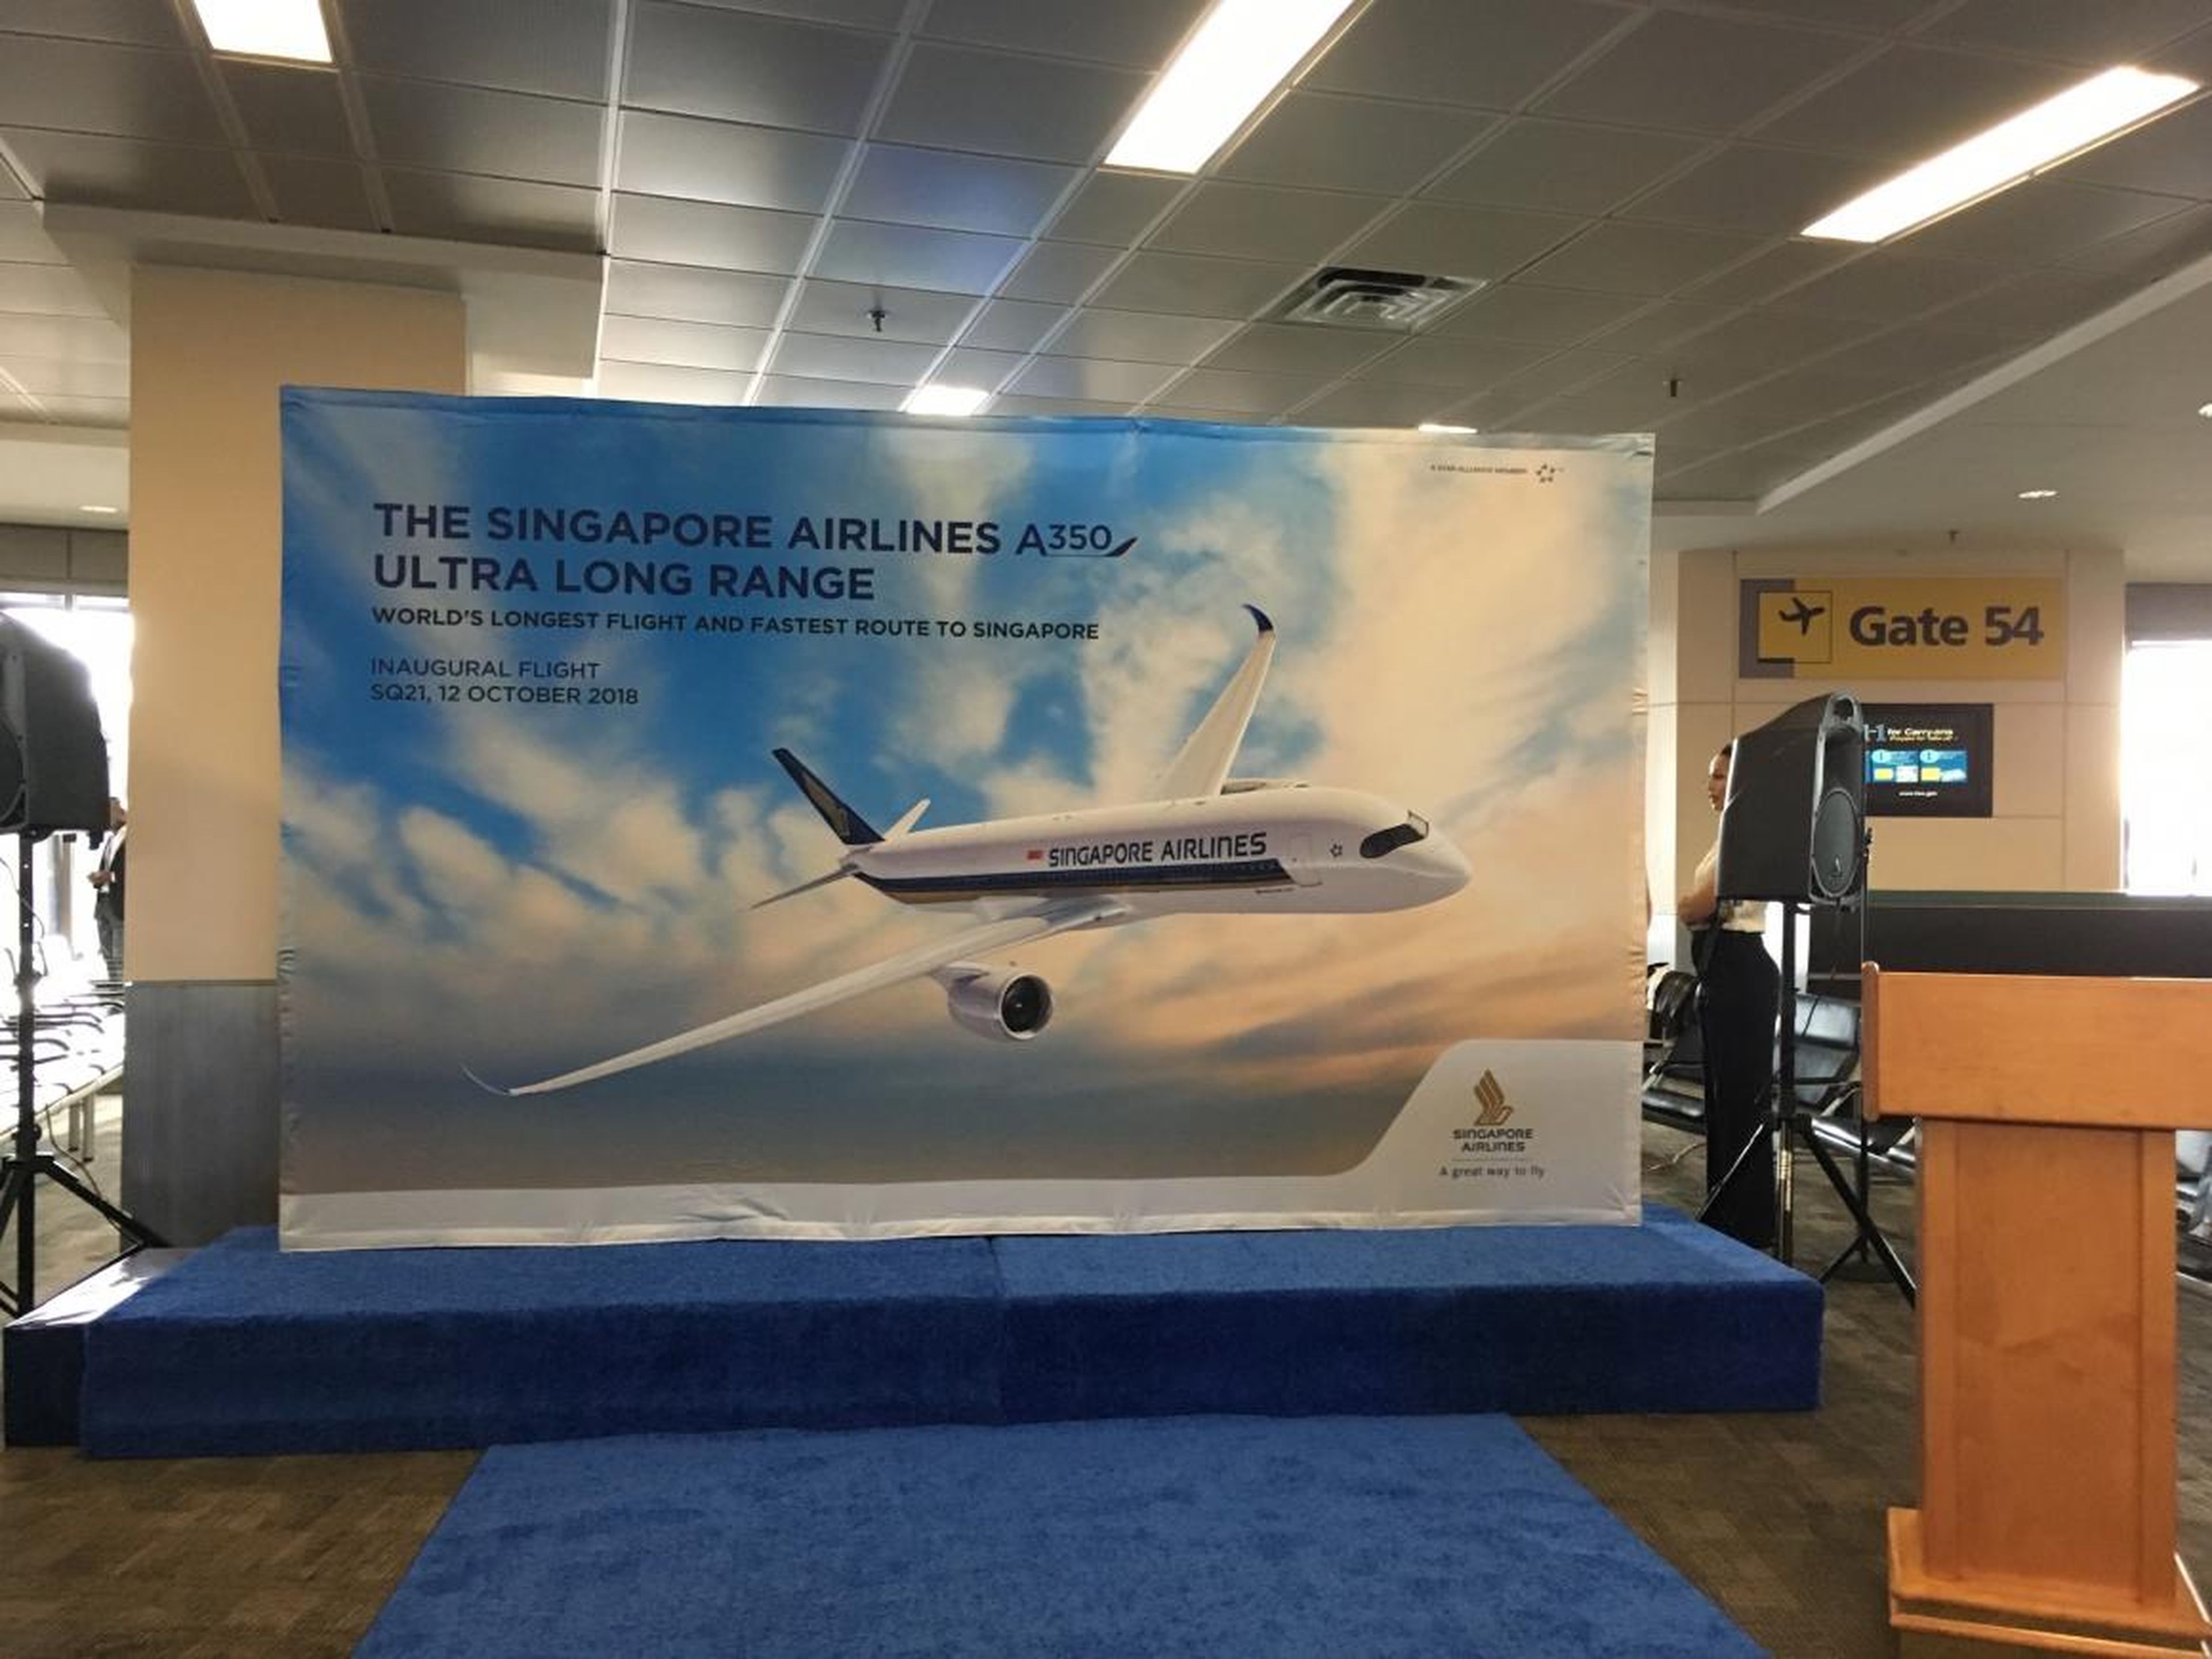 On October 12, Singapore Airlines relaunched Flight SQ21, its nonstop flight from Newark Liberty International Airport to Changi Airport in Singapore.